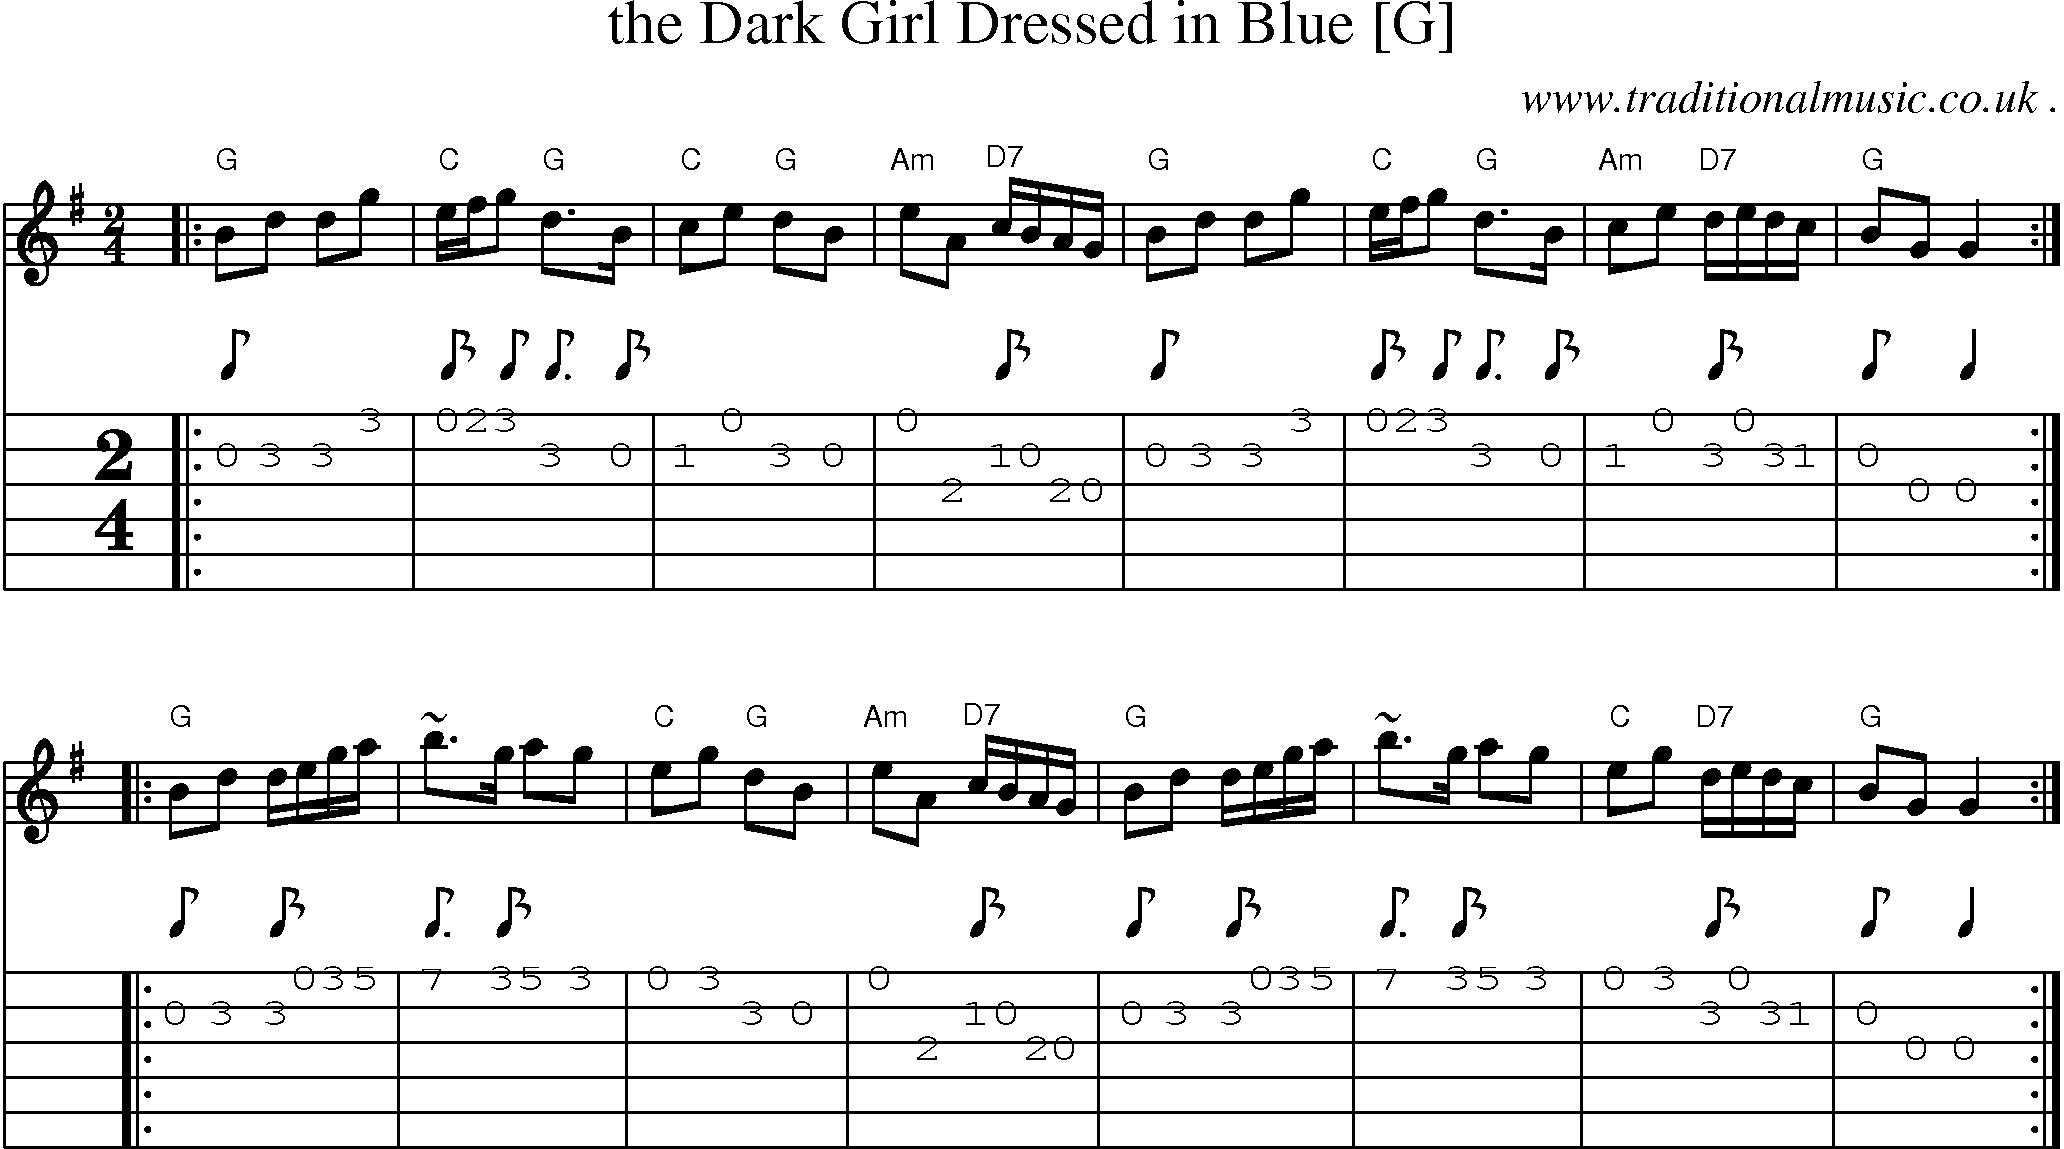 Sheet-music  score, Chords and Guitar Tabs for The Dark Girl Dressed In Blue [g]